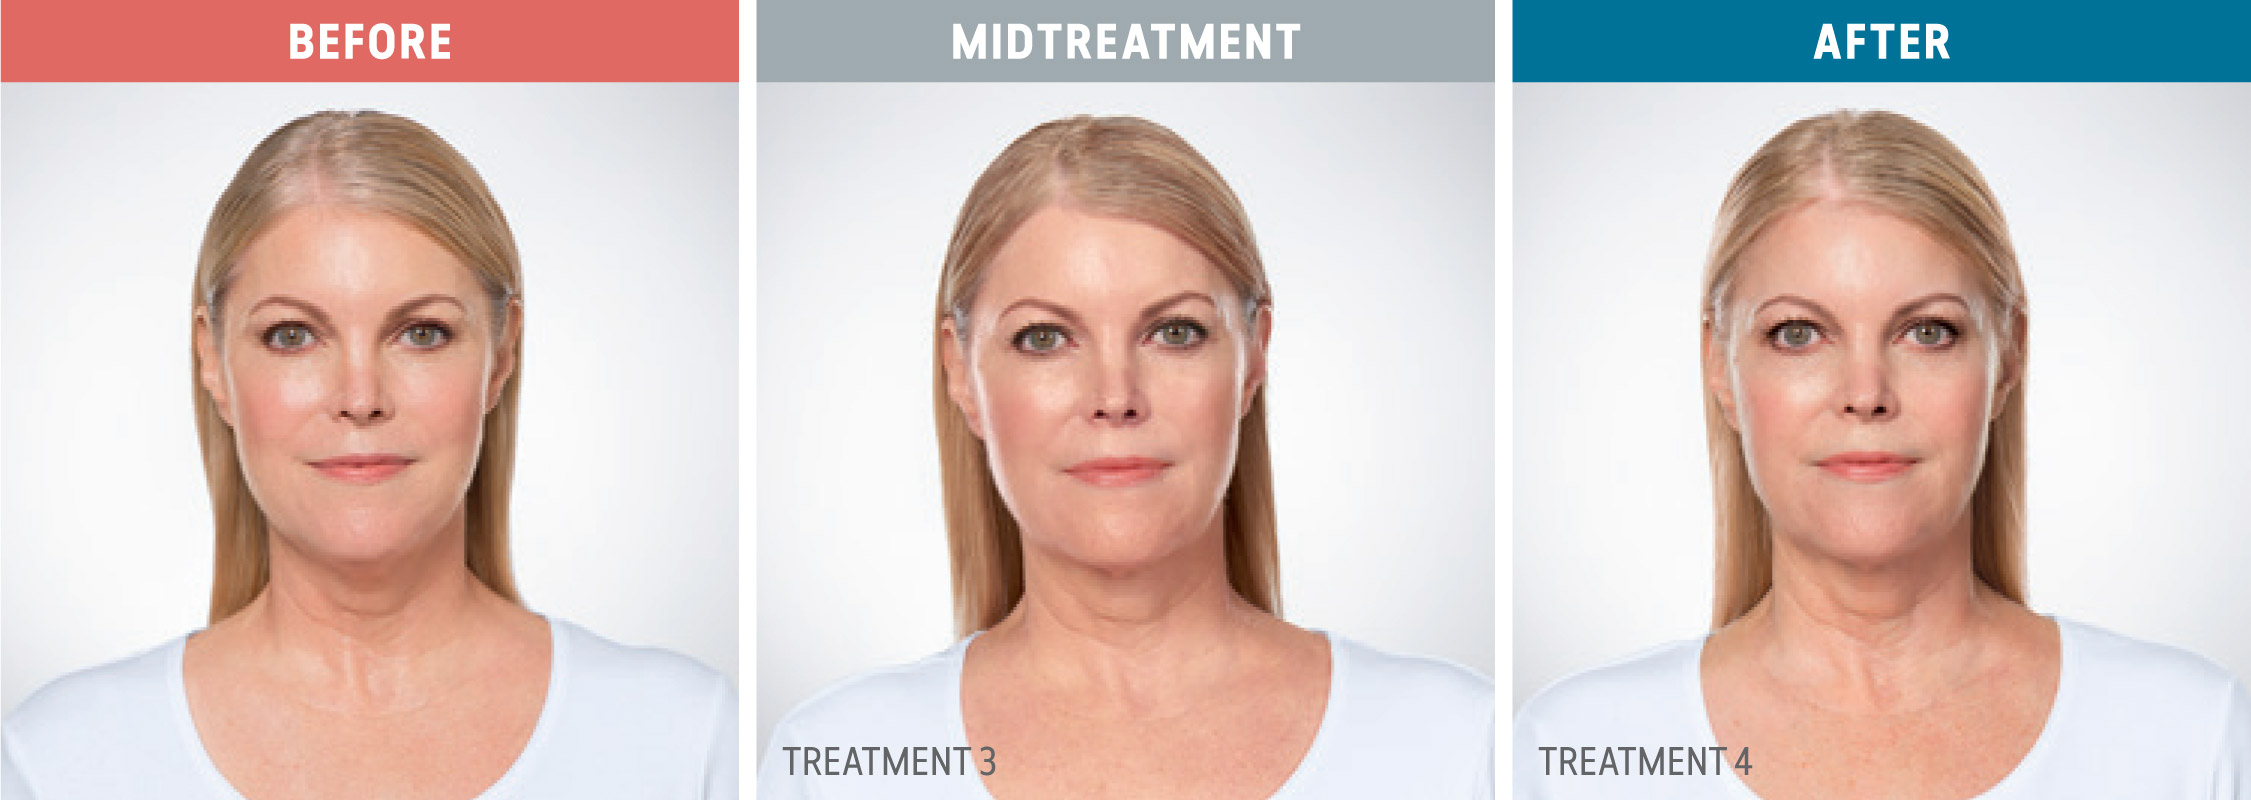 Kybella before, midtreatment, and after photos